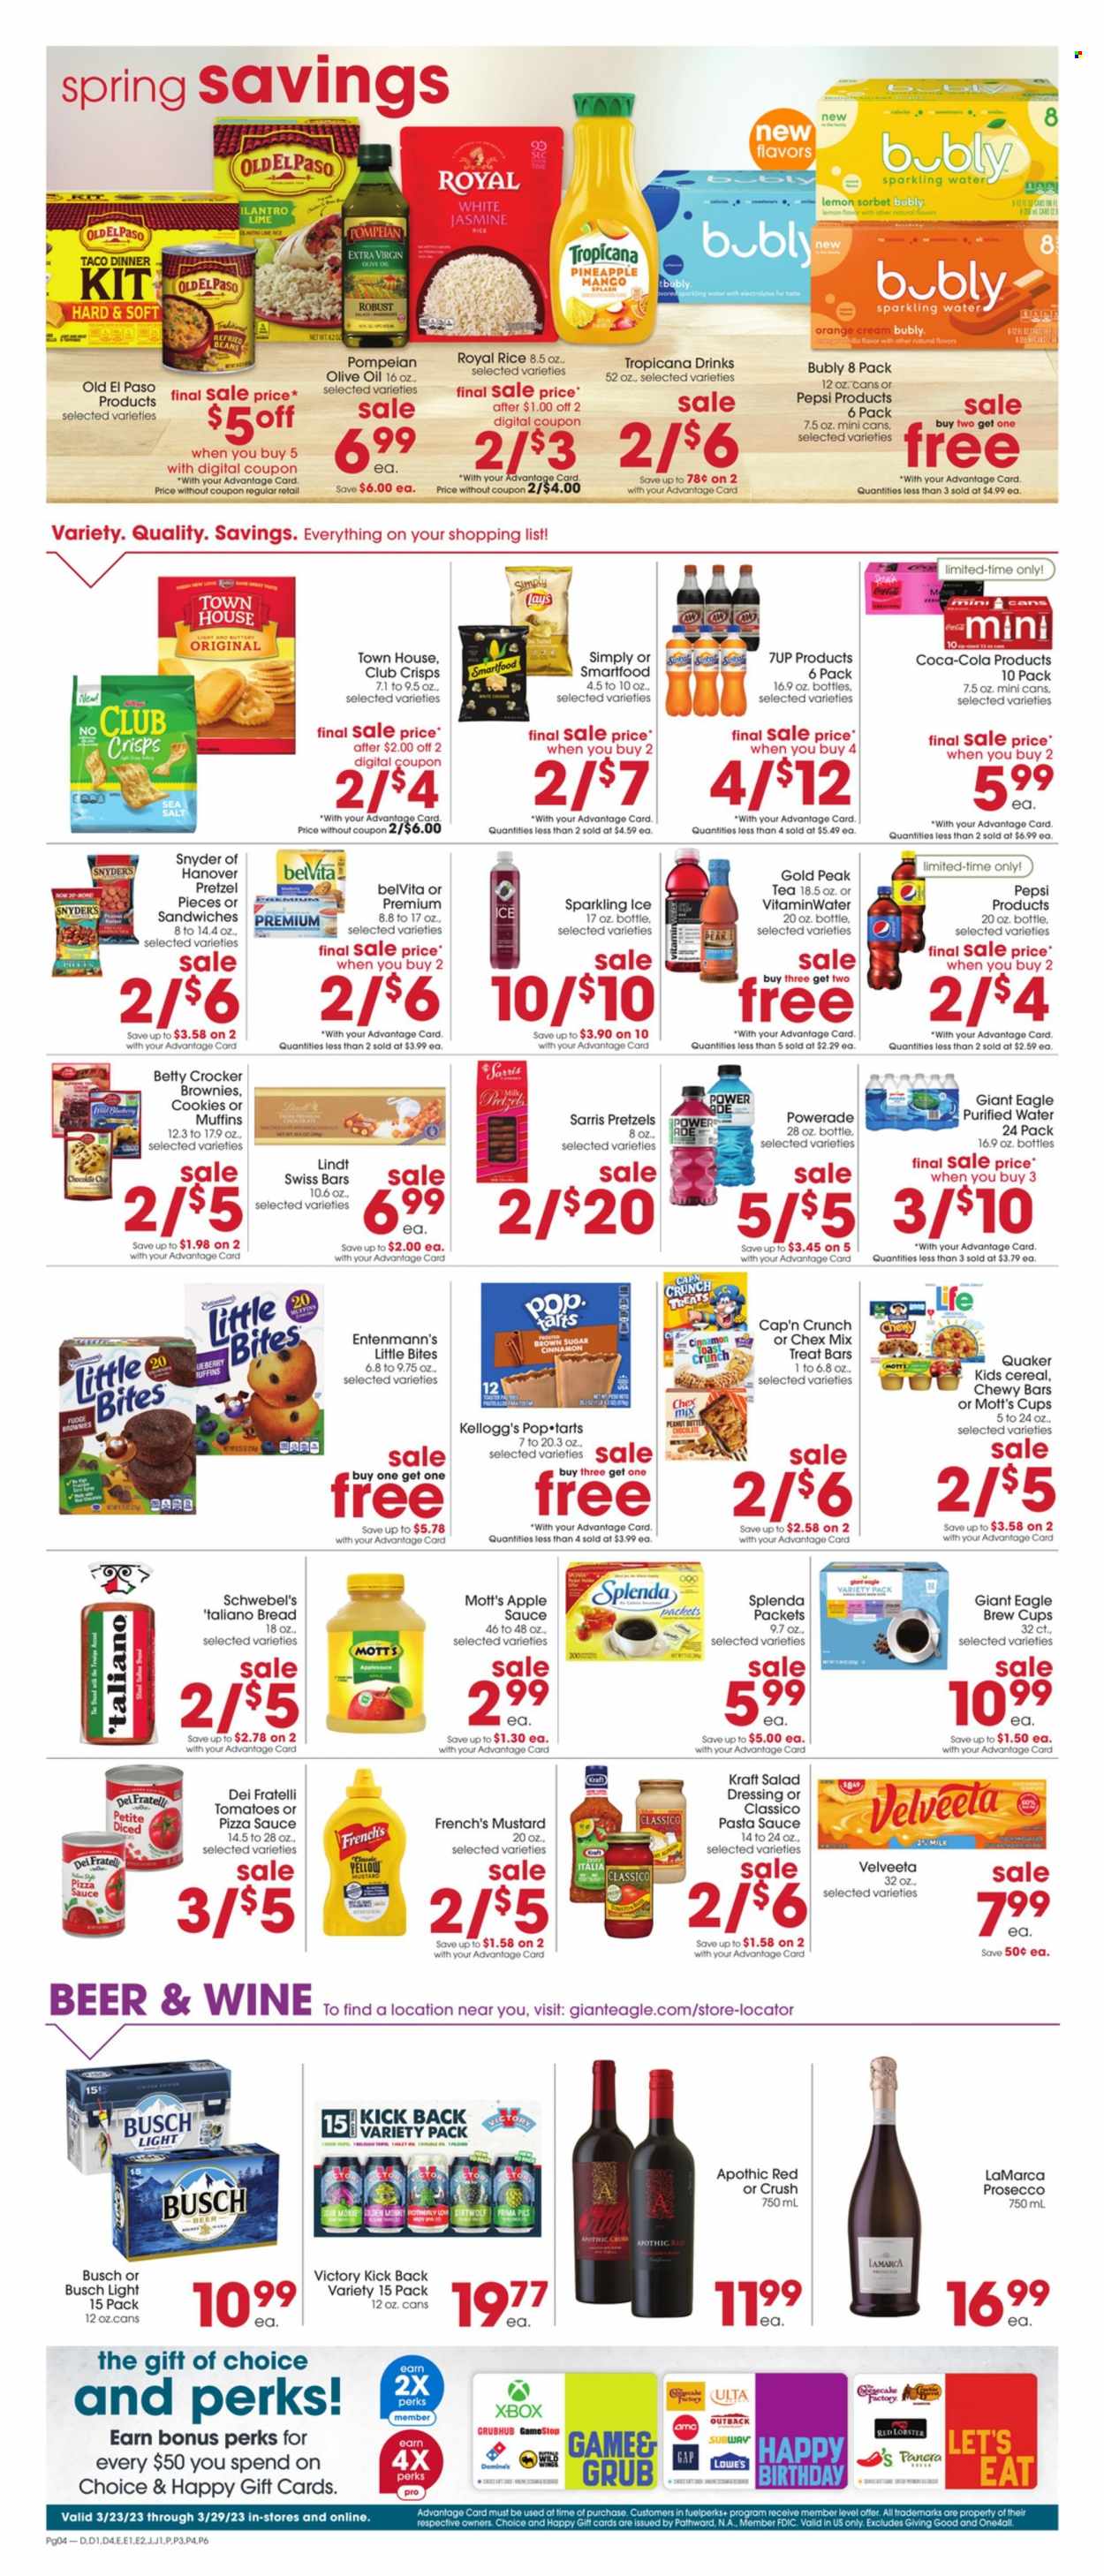 thumbnail - Giant Eagle Flyer - 03/23/2023 - 03/29/2023 - Sales products - bread, pretzels, Old El Paso, Entenmann's, beans, pineapple, oranges, Mott's, lobster, red lobster, pasta sauce, sandwich, sauce, dinner kit, Quaker, Kraft®, milk, cookies, fudge, chocolate chips, Lindt, Kellogg's, Pop-Tarts, Little Bites, Smartfood, Chex Mix, cane sugar, sea salt, refried beans, cereals, Cap'n Crunch, belVita, rice, jasmine rice, cinnamon, mustard, salad dressing, dressing, Classico, extra virgin olive oil, olive oil, oil, apple sauce, Coca-Cola, Powerade, Pepsi, 7UP, Gold Peak Tea, sparkling water, purified water, water, tea, prosecco, beer, Busch, cup. Page 4.